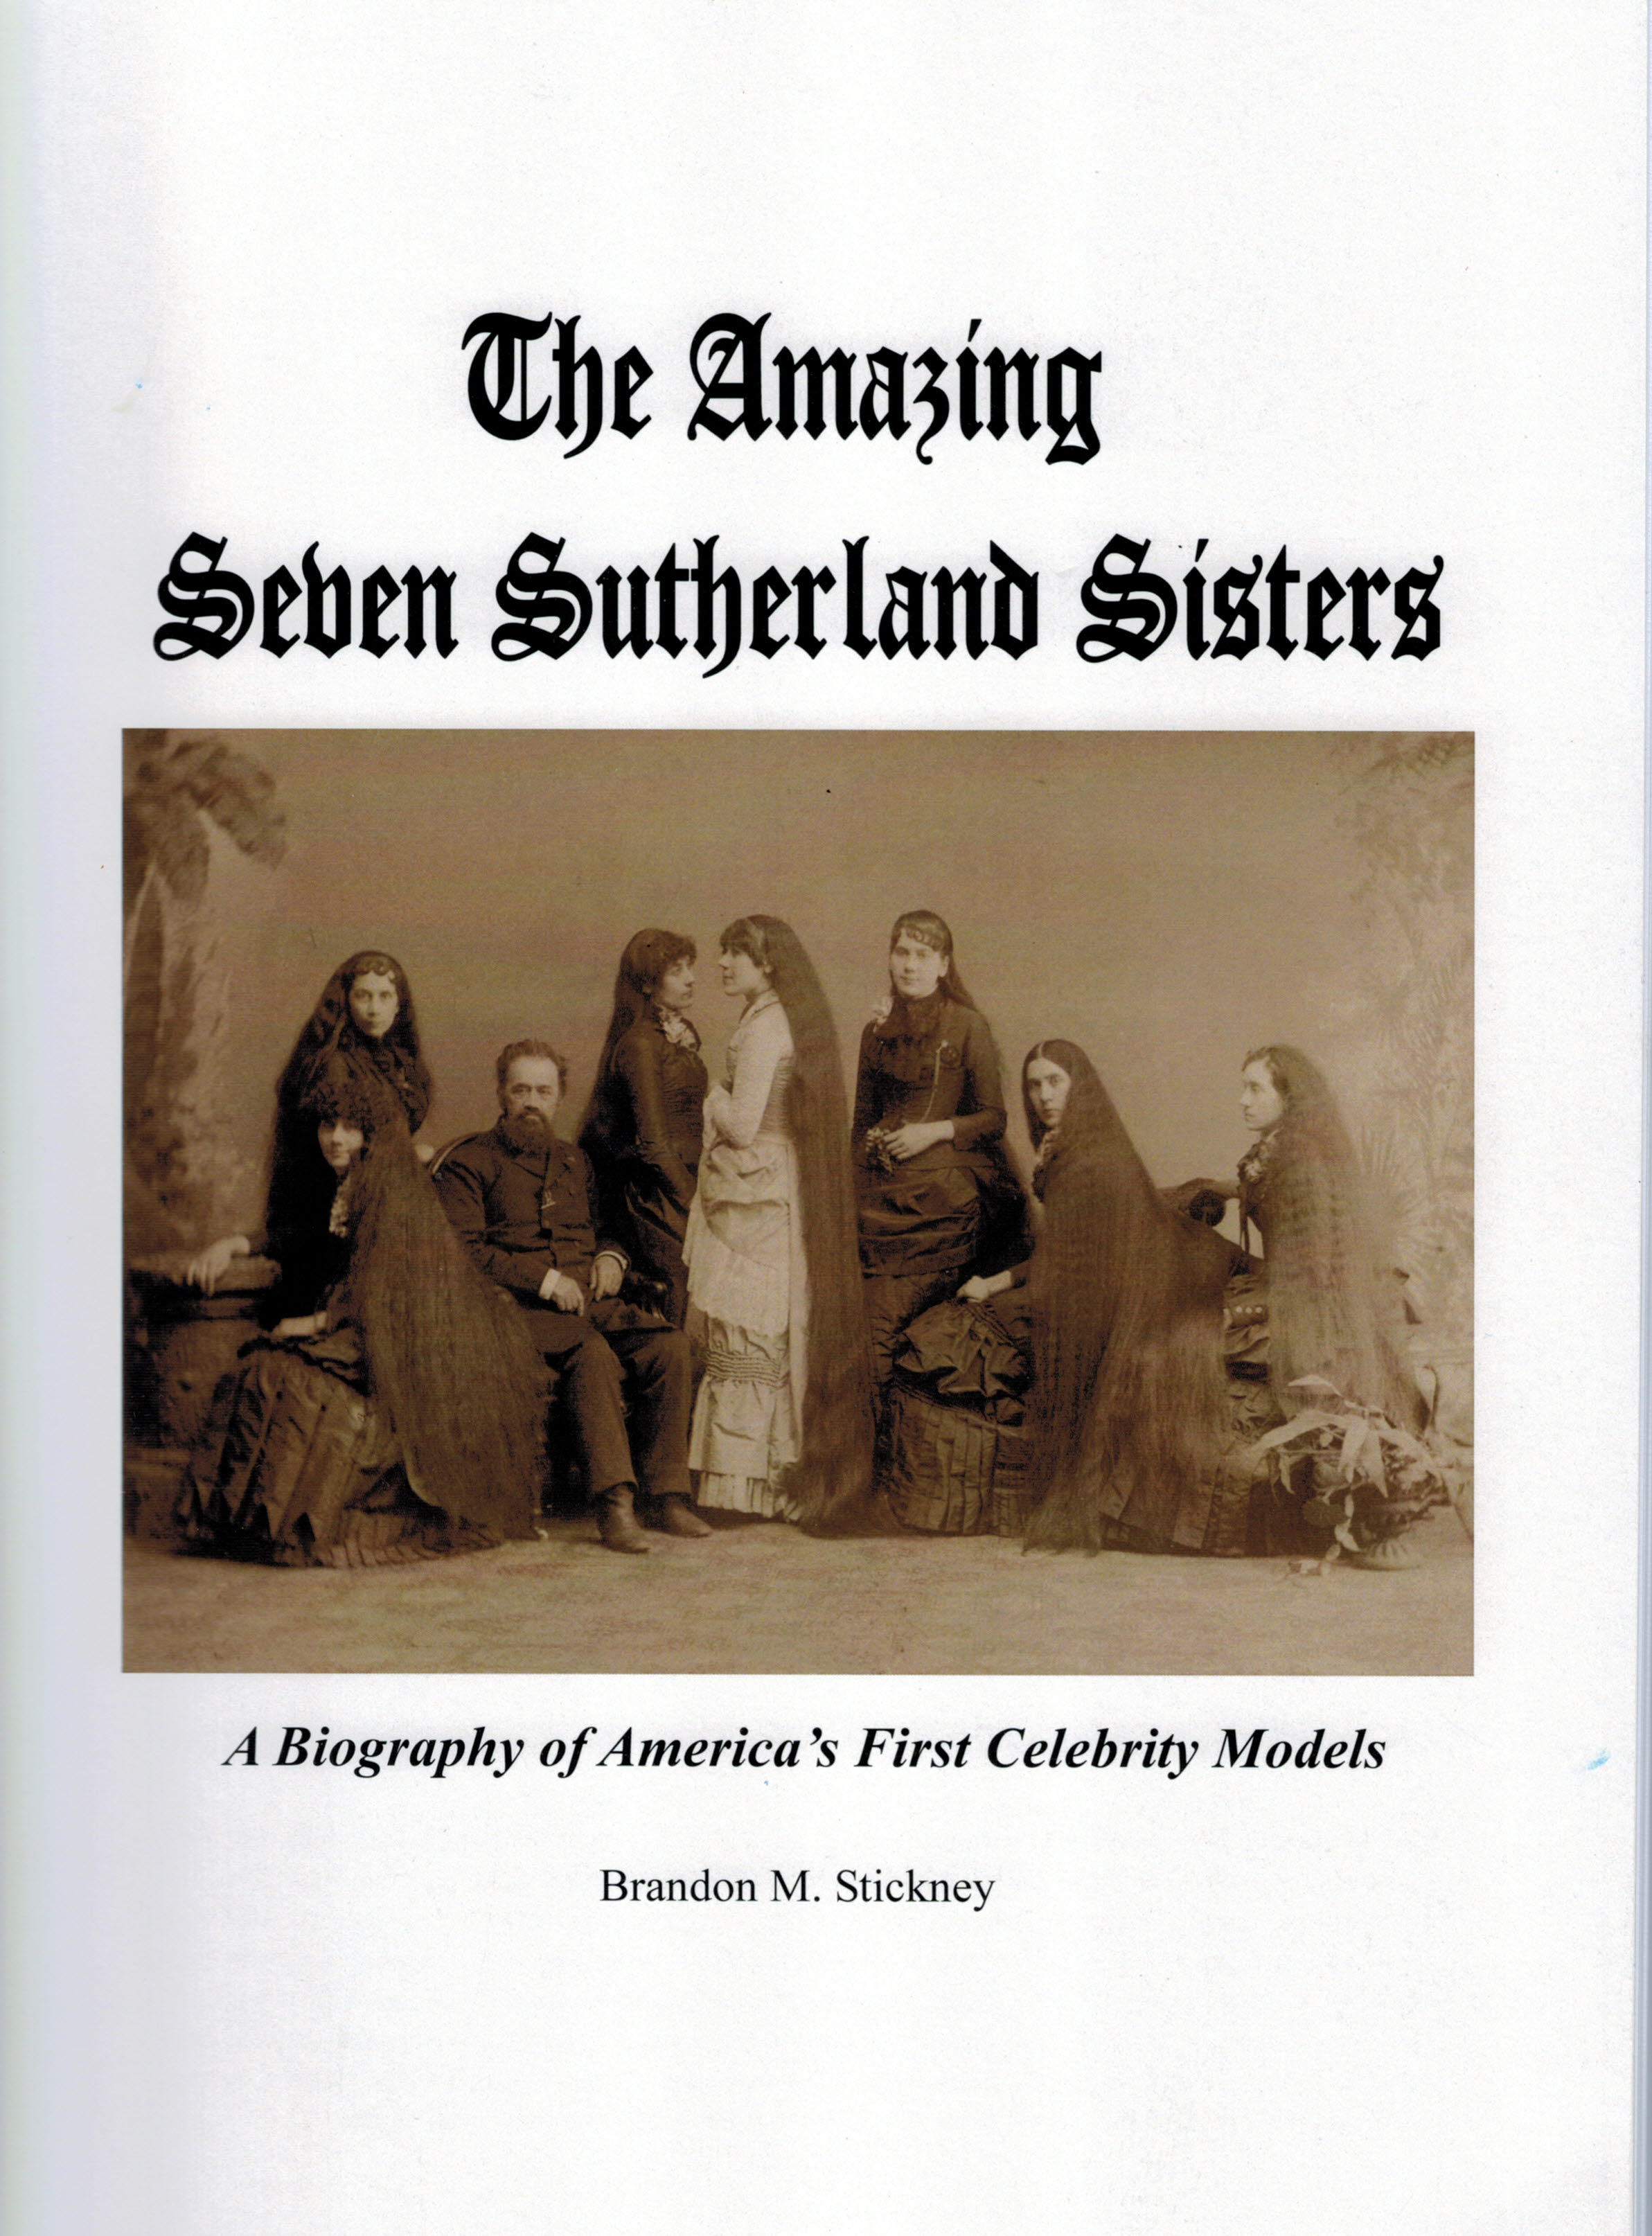 The Amazing Seven Sutherland Sisters Book